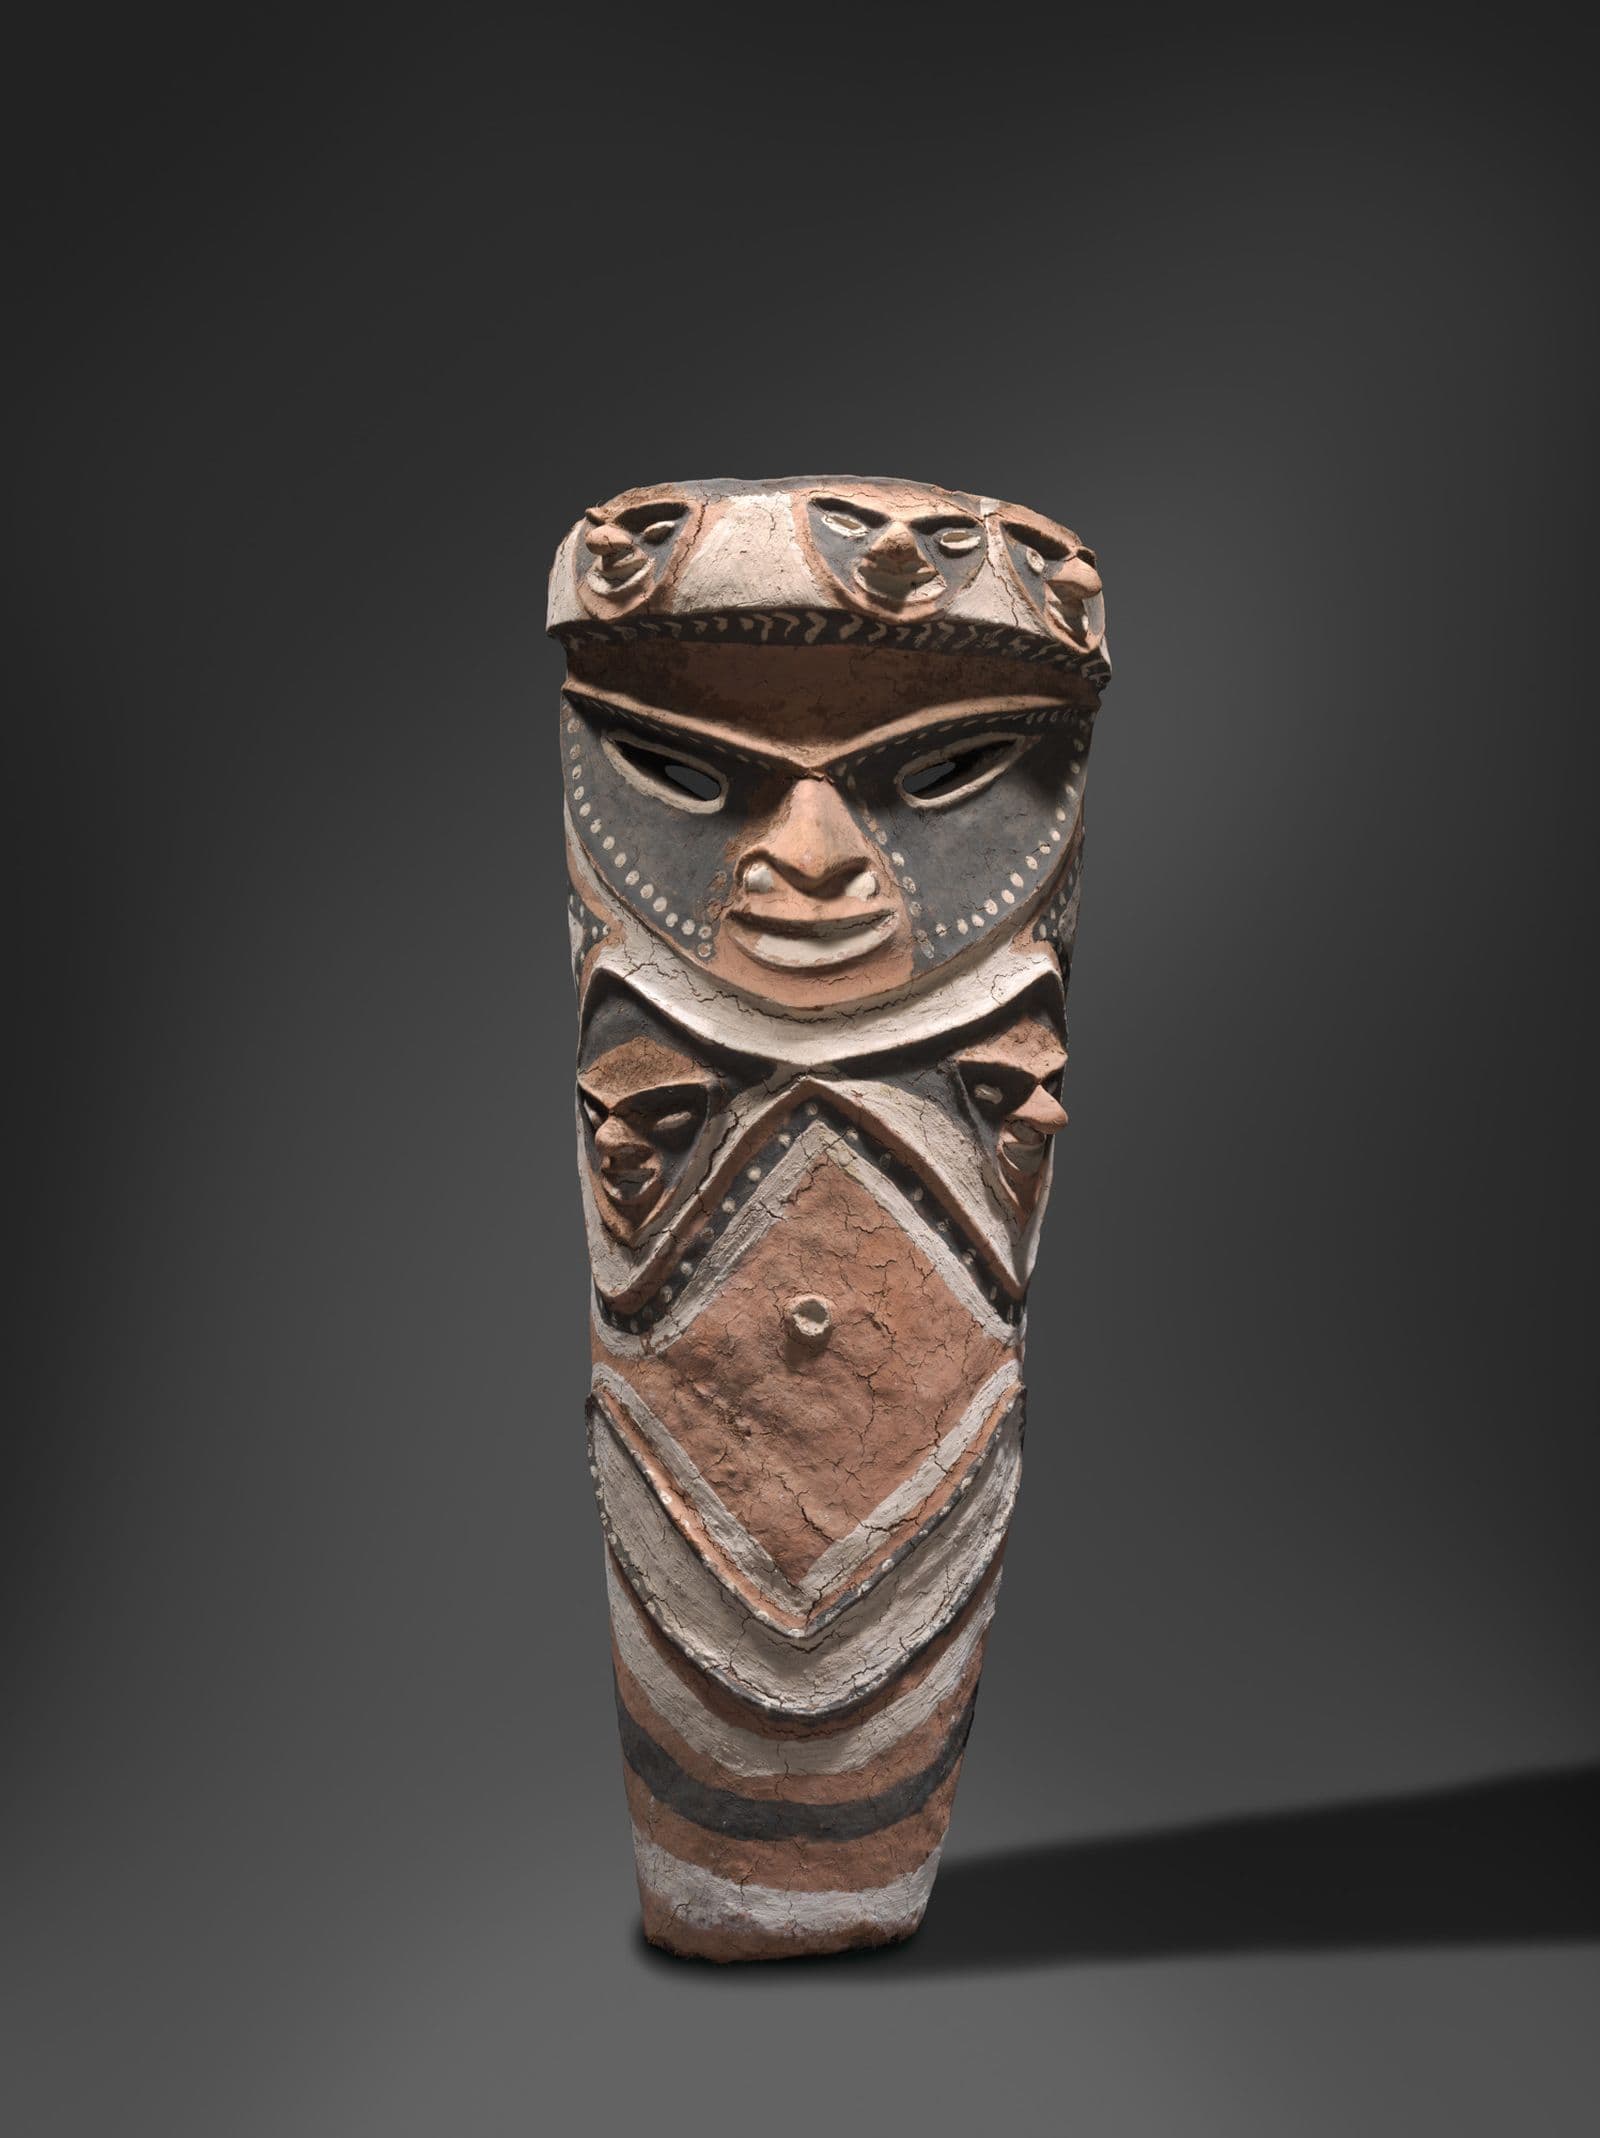 Traditional Vanuatuan sculpture depicting a central face accompanied by five other faces above and below. Painted in white, black and ochre